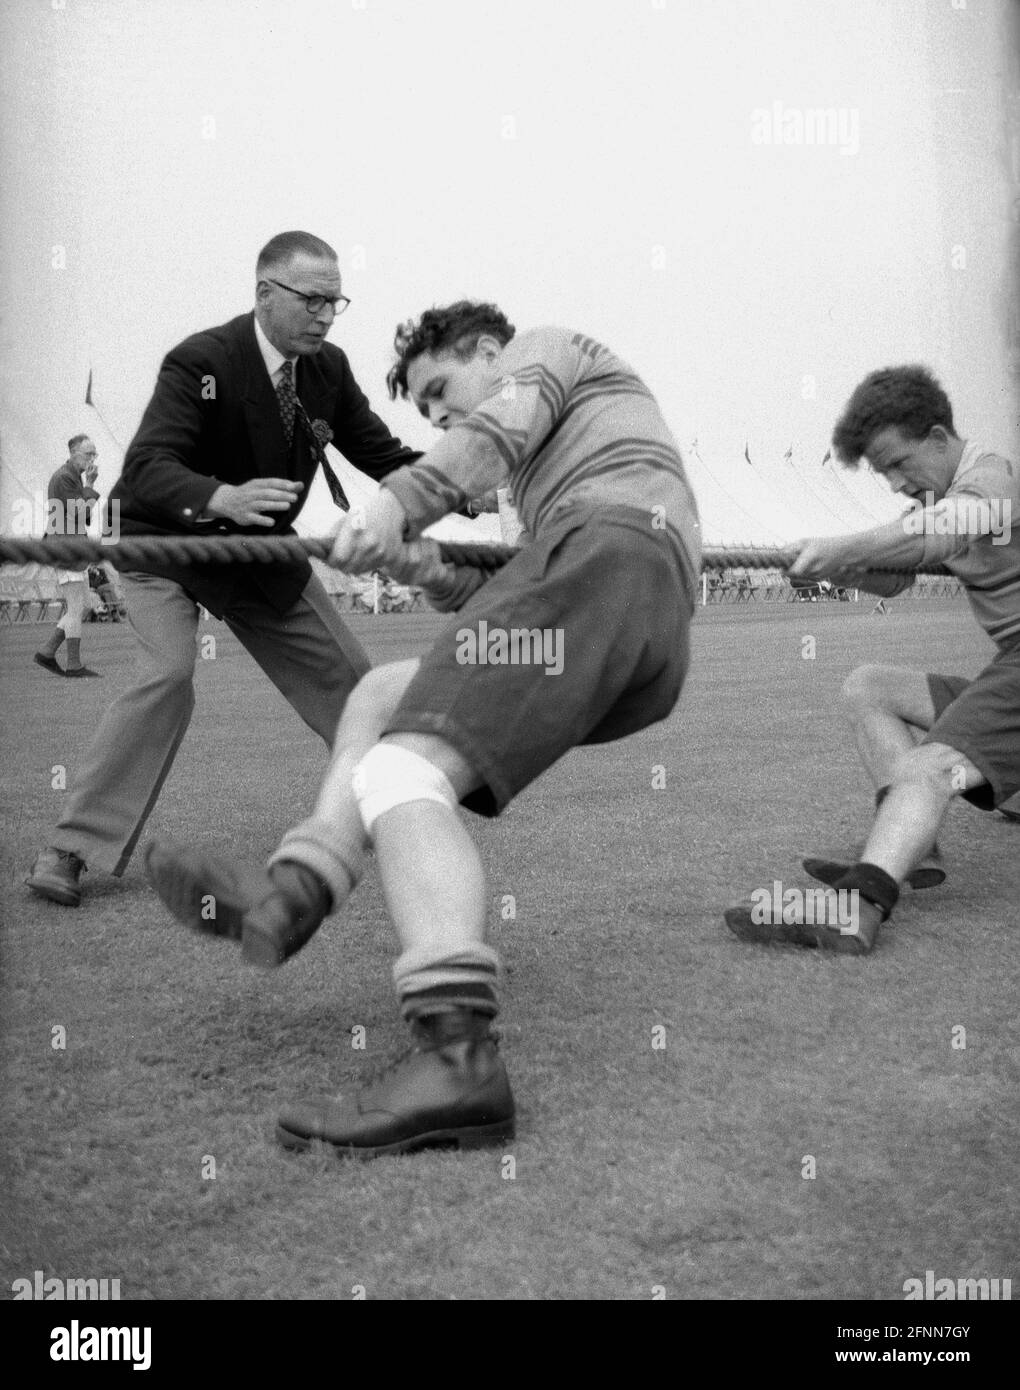 1954, historical, outside in a field, at a civil service sports day, in a tug-of-war contest, an official beside two male competitors wearing heavy ex-army boots pulling on the rope, checking whether they have crossed the winning point. An ancient sport, Tug of War which was in the summer Olympic games from 1900 to 1920, is a test of strength between two teams with the goal being to bring the rope a certain distance in one direction against the force of the opposite team's pull. Strong leg and arm muscles are needed. Stock Photo